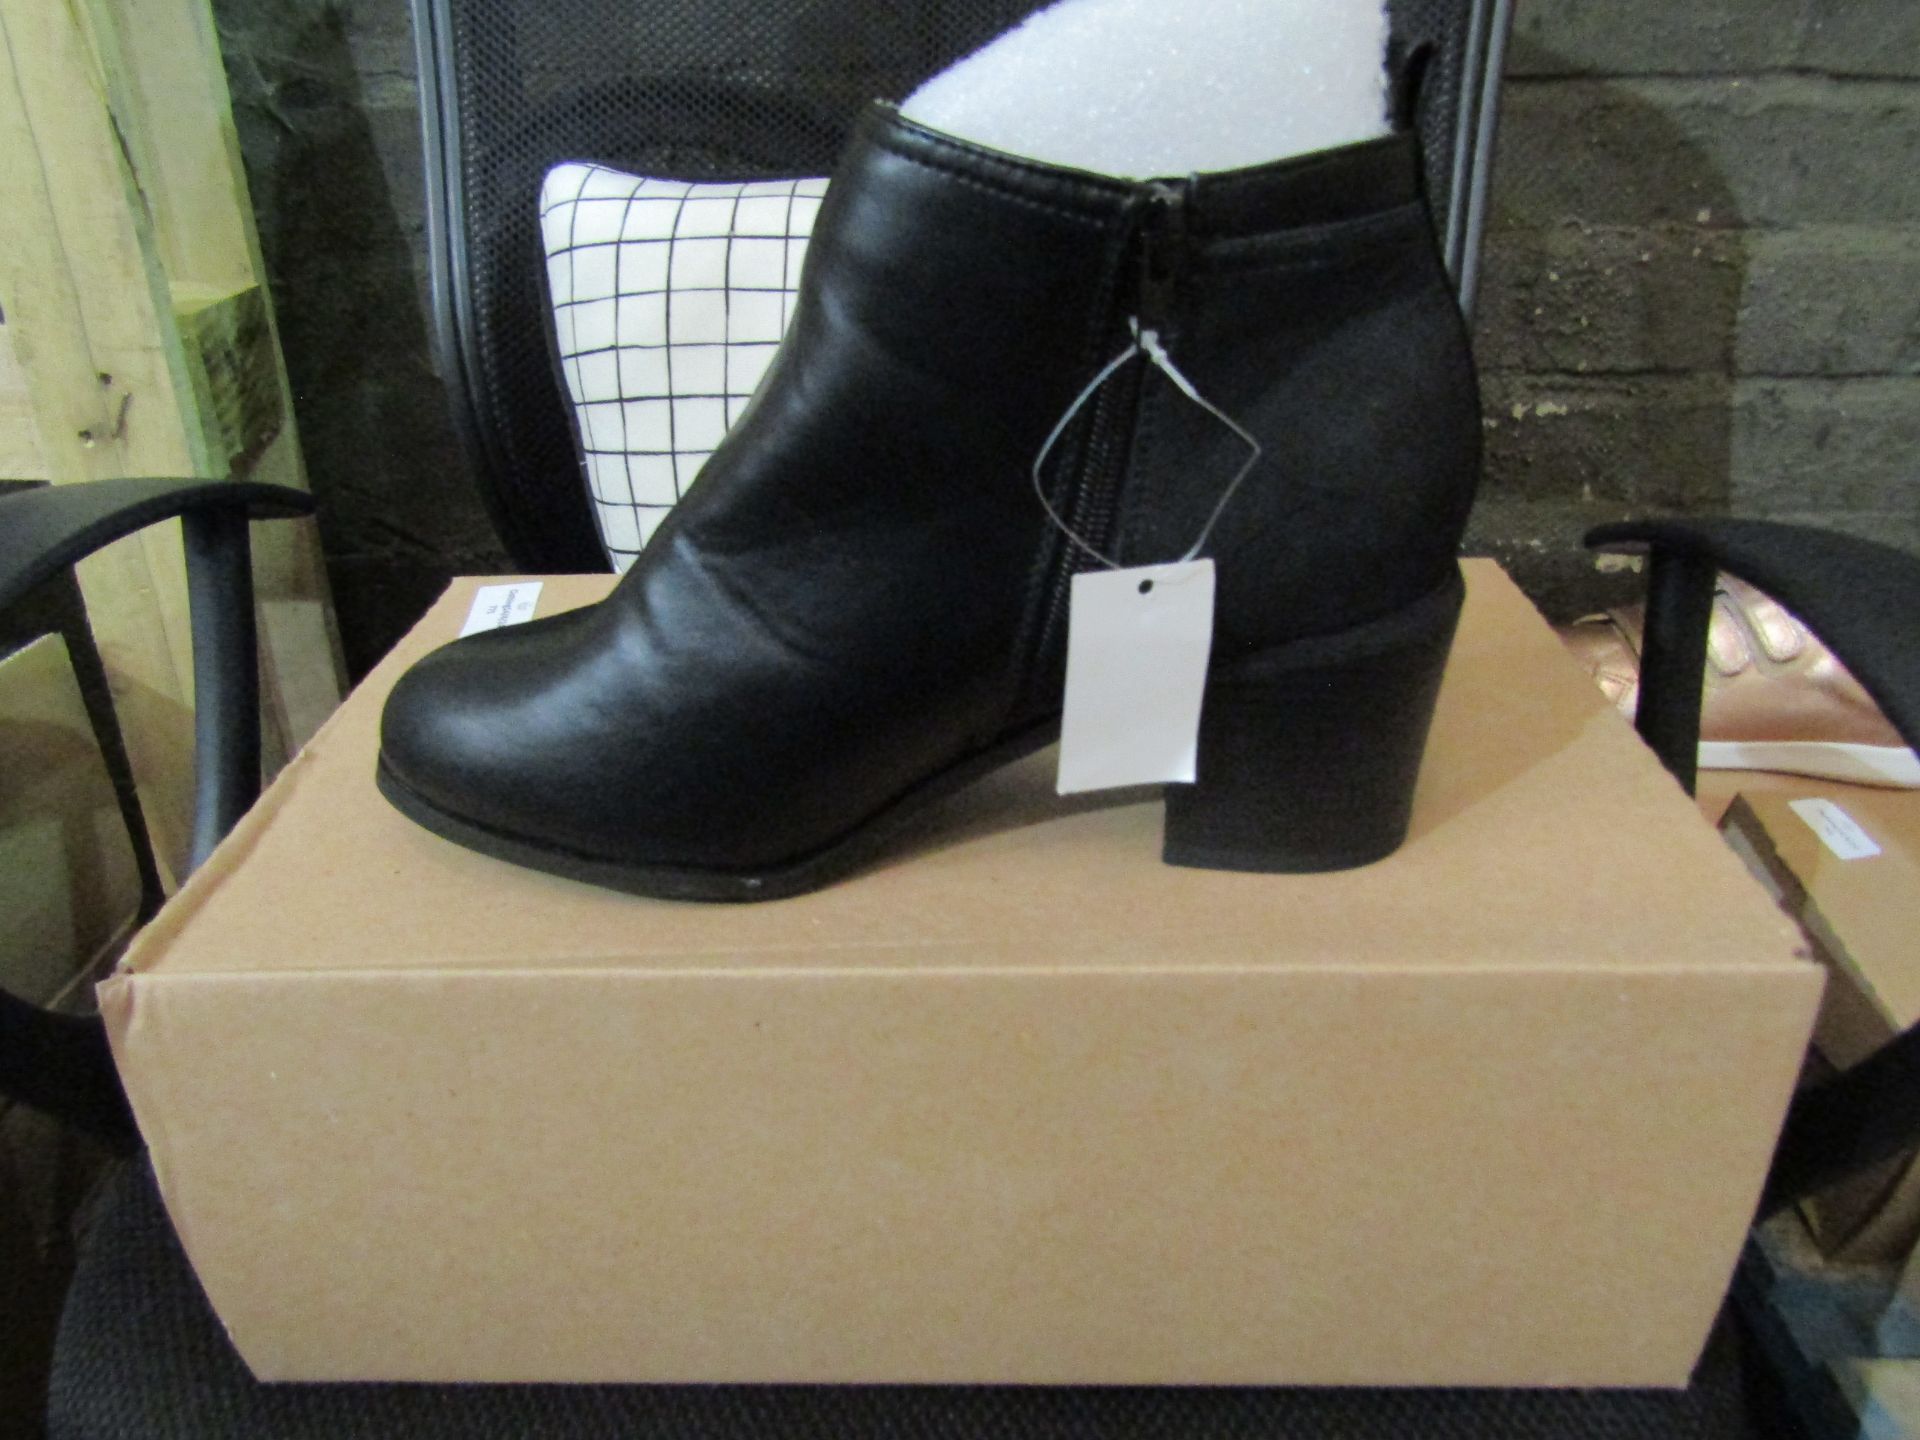 JD Williams Sole Diva Ladies Black Leather Ankle High Zip Up Boots, Size: 6EEE - Unused & Boxed.